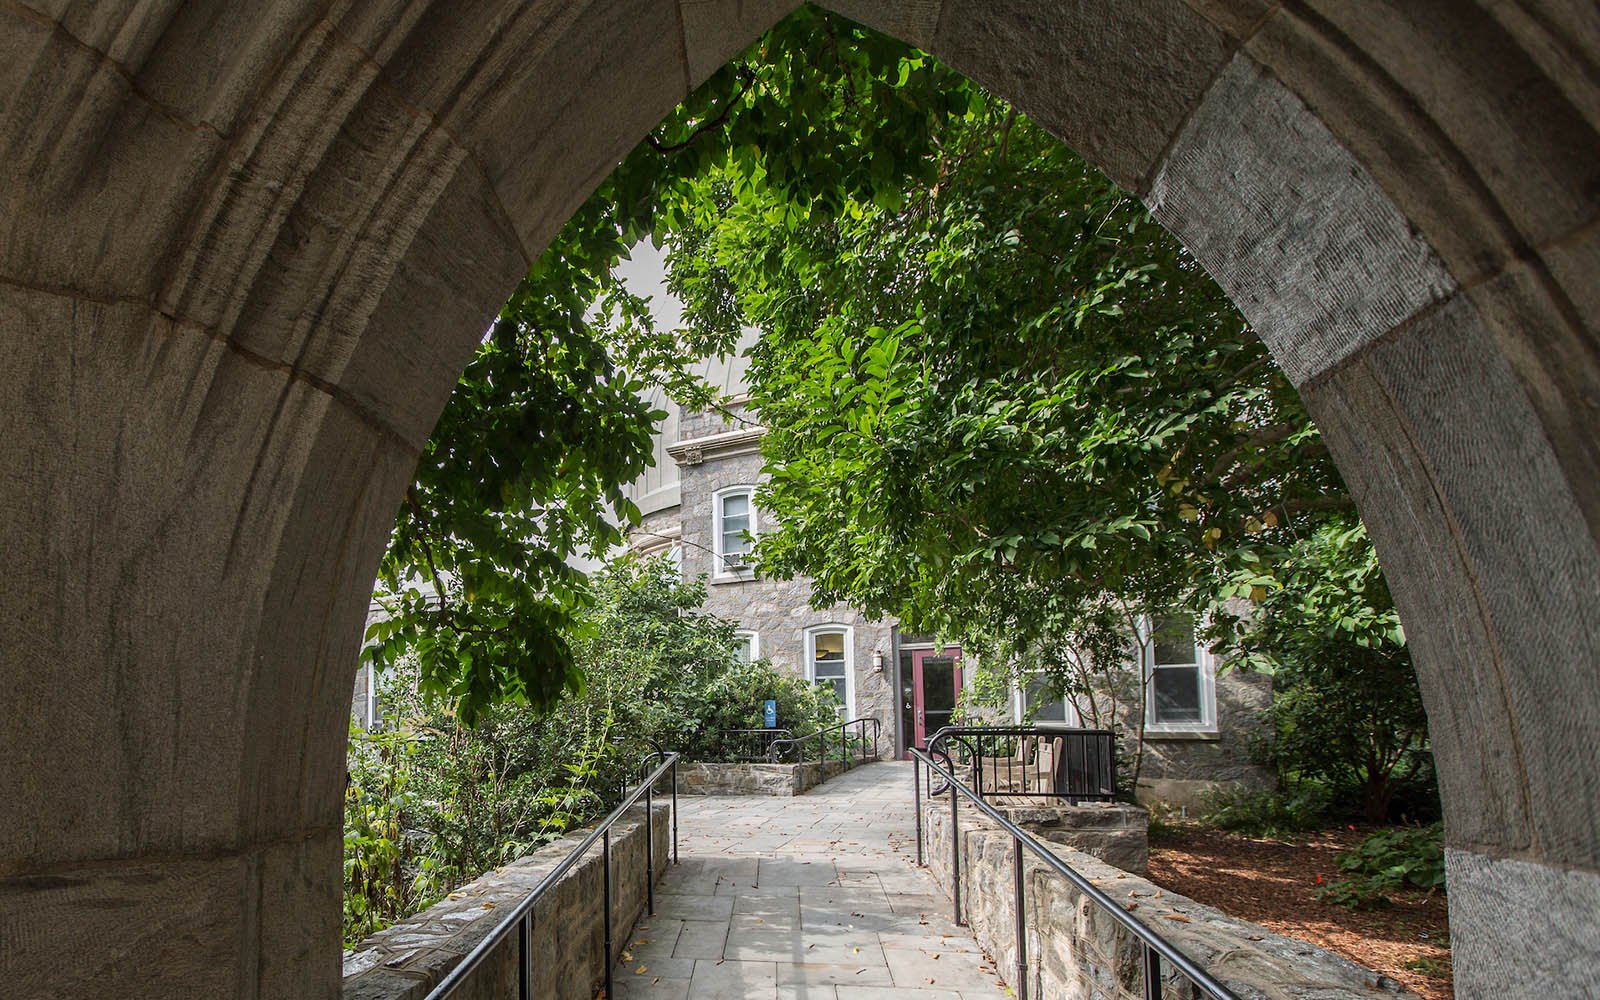 Archway to IC